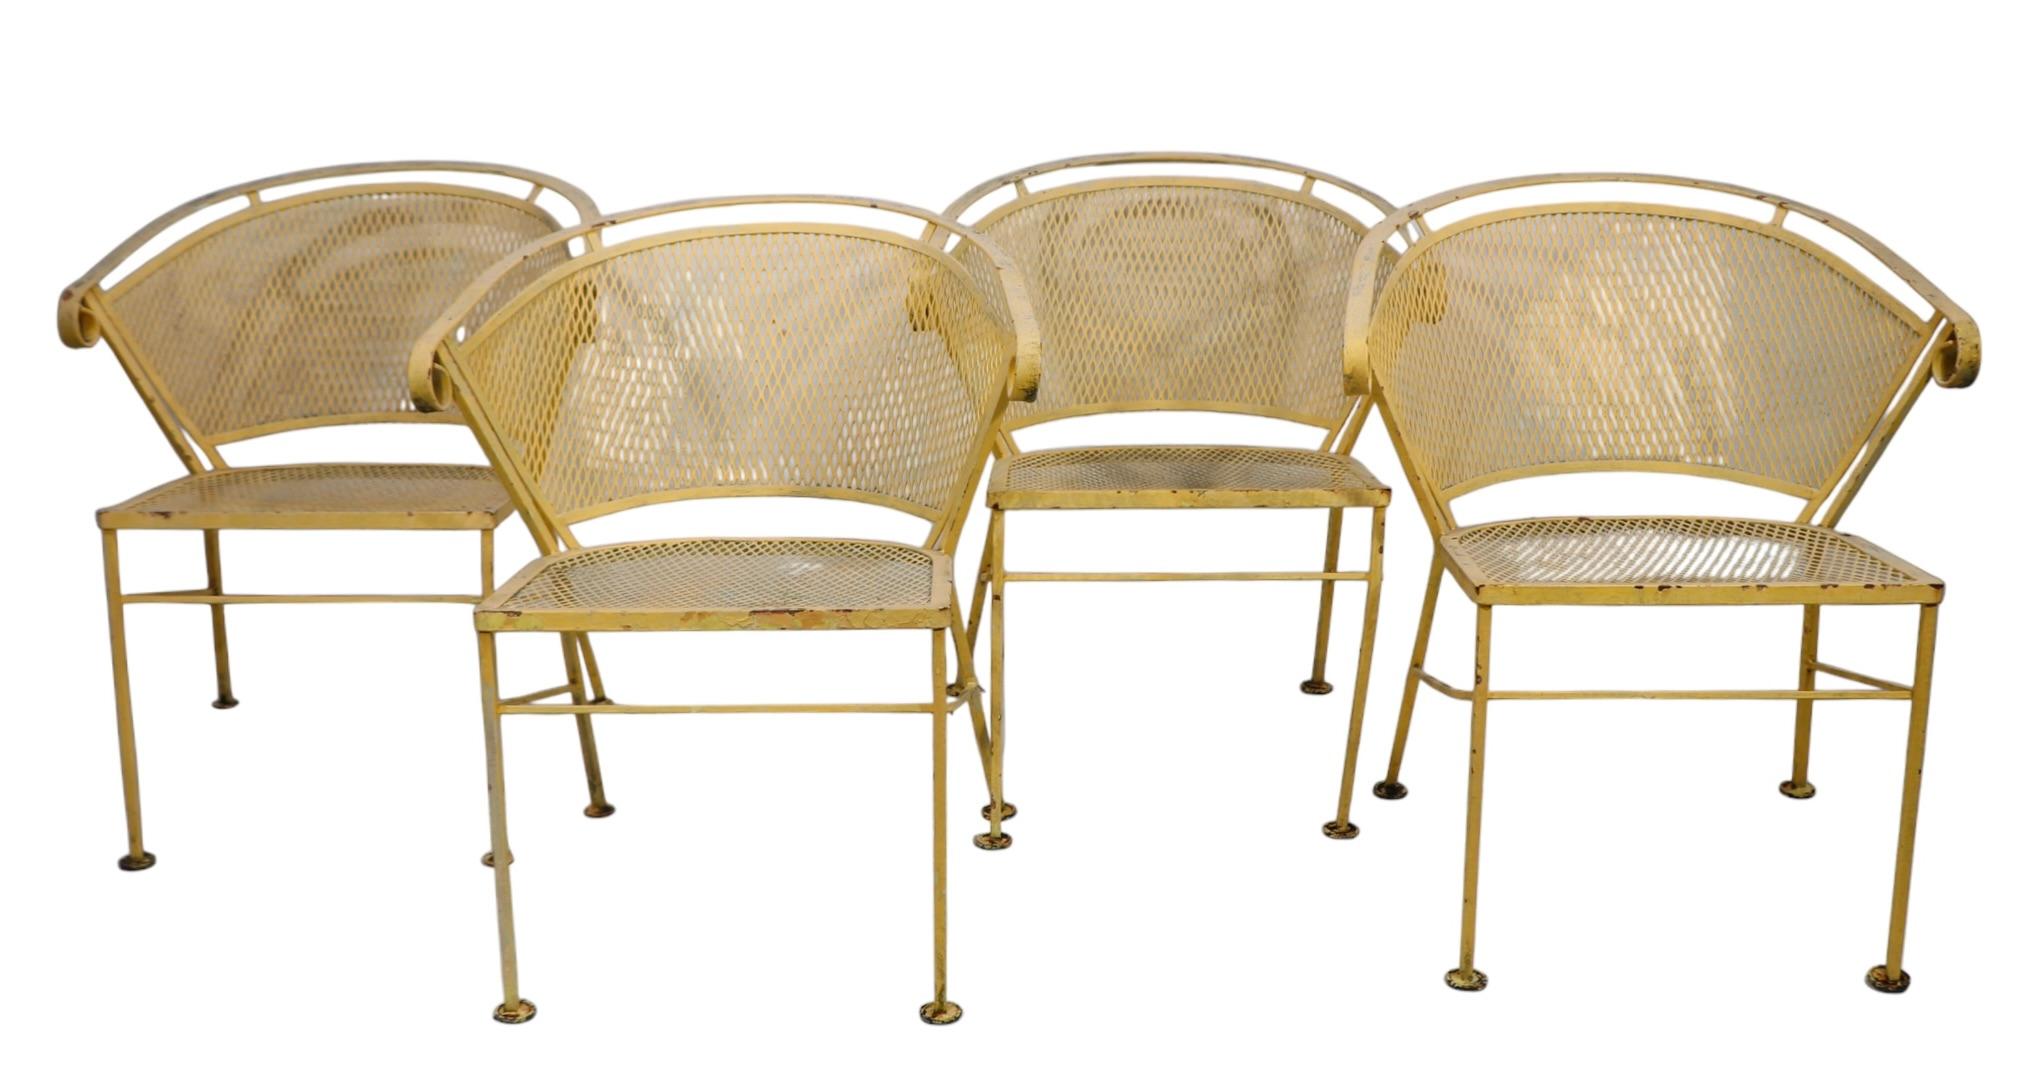 Set of Four Mid Century Wrought Iron Garden Patio Dining Chairs by Woodard  In Good Condition For Sale In New York, NY